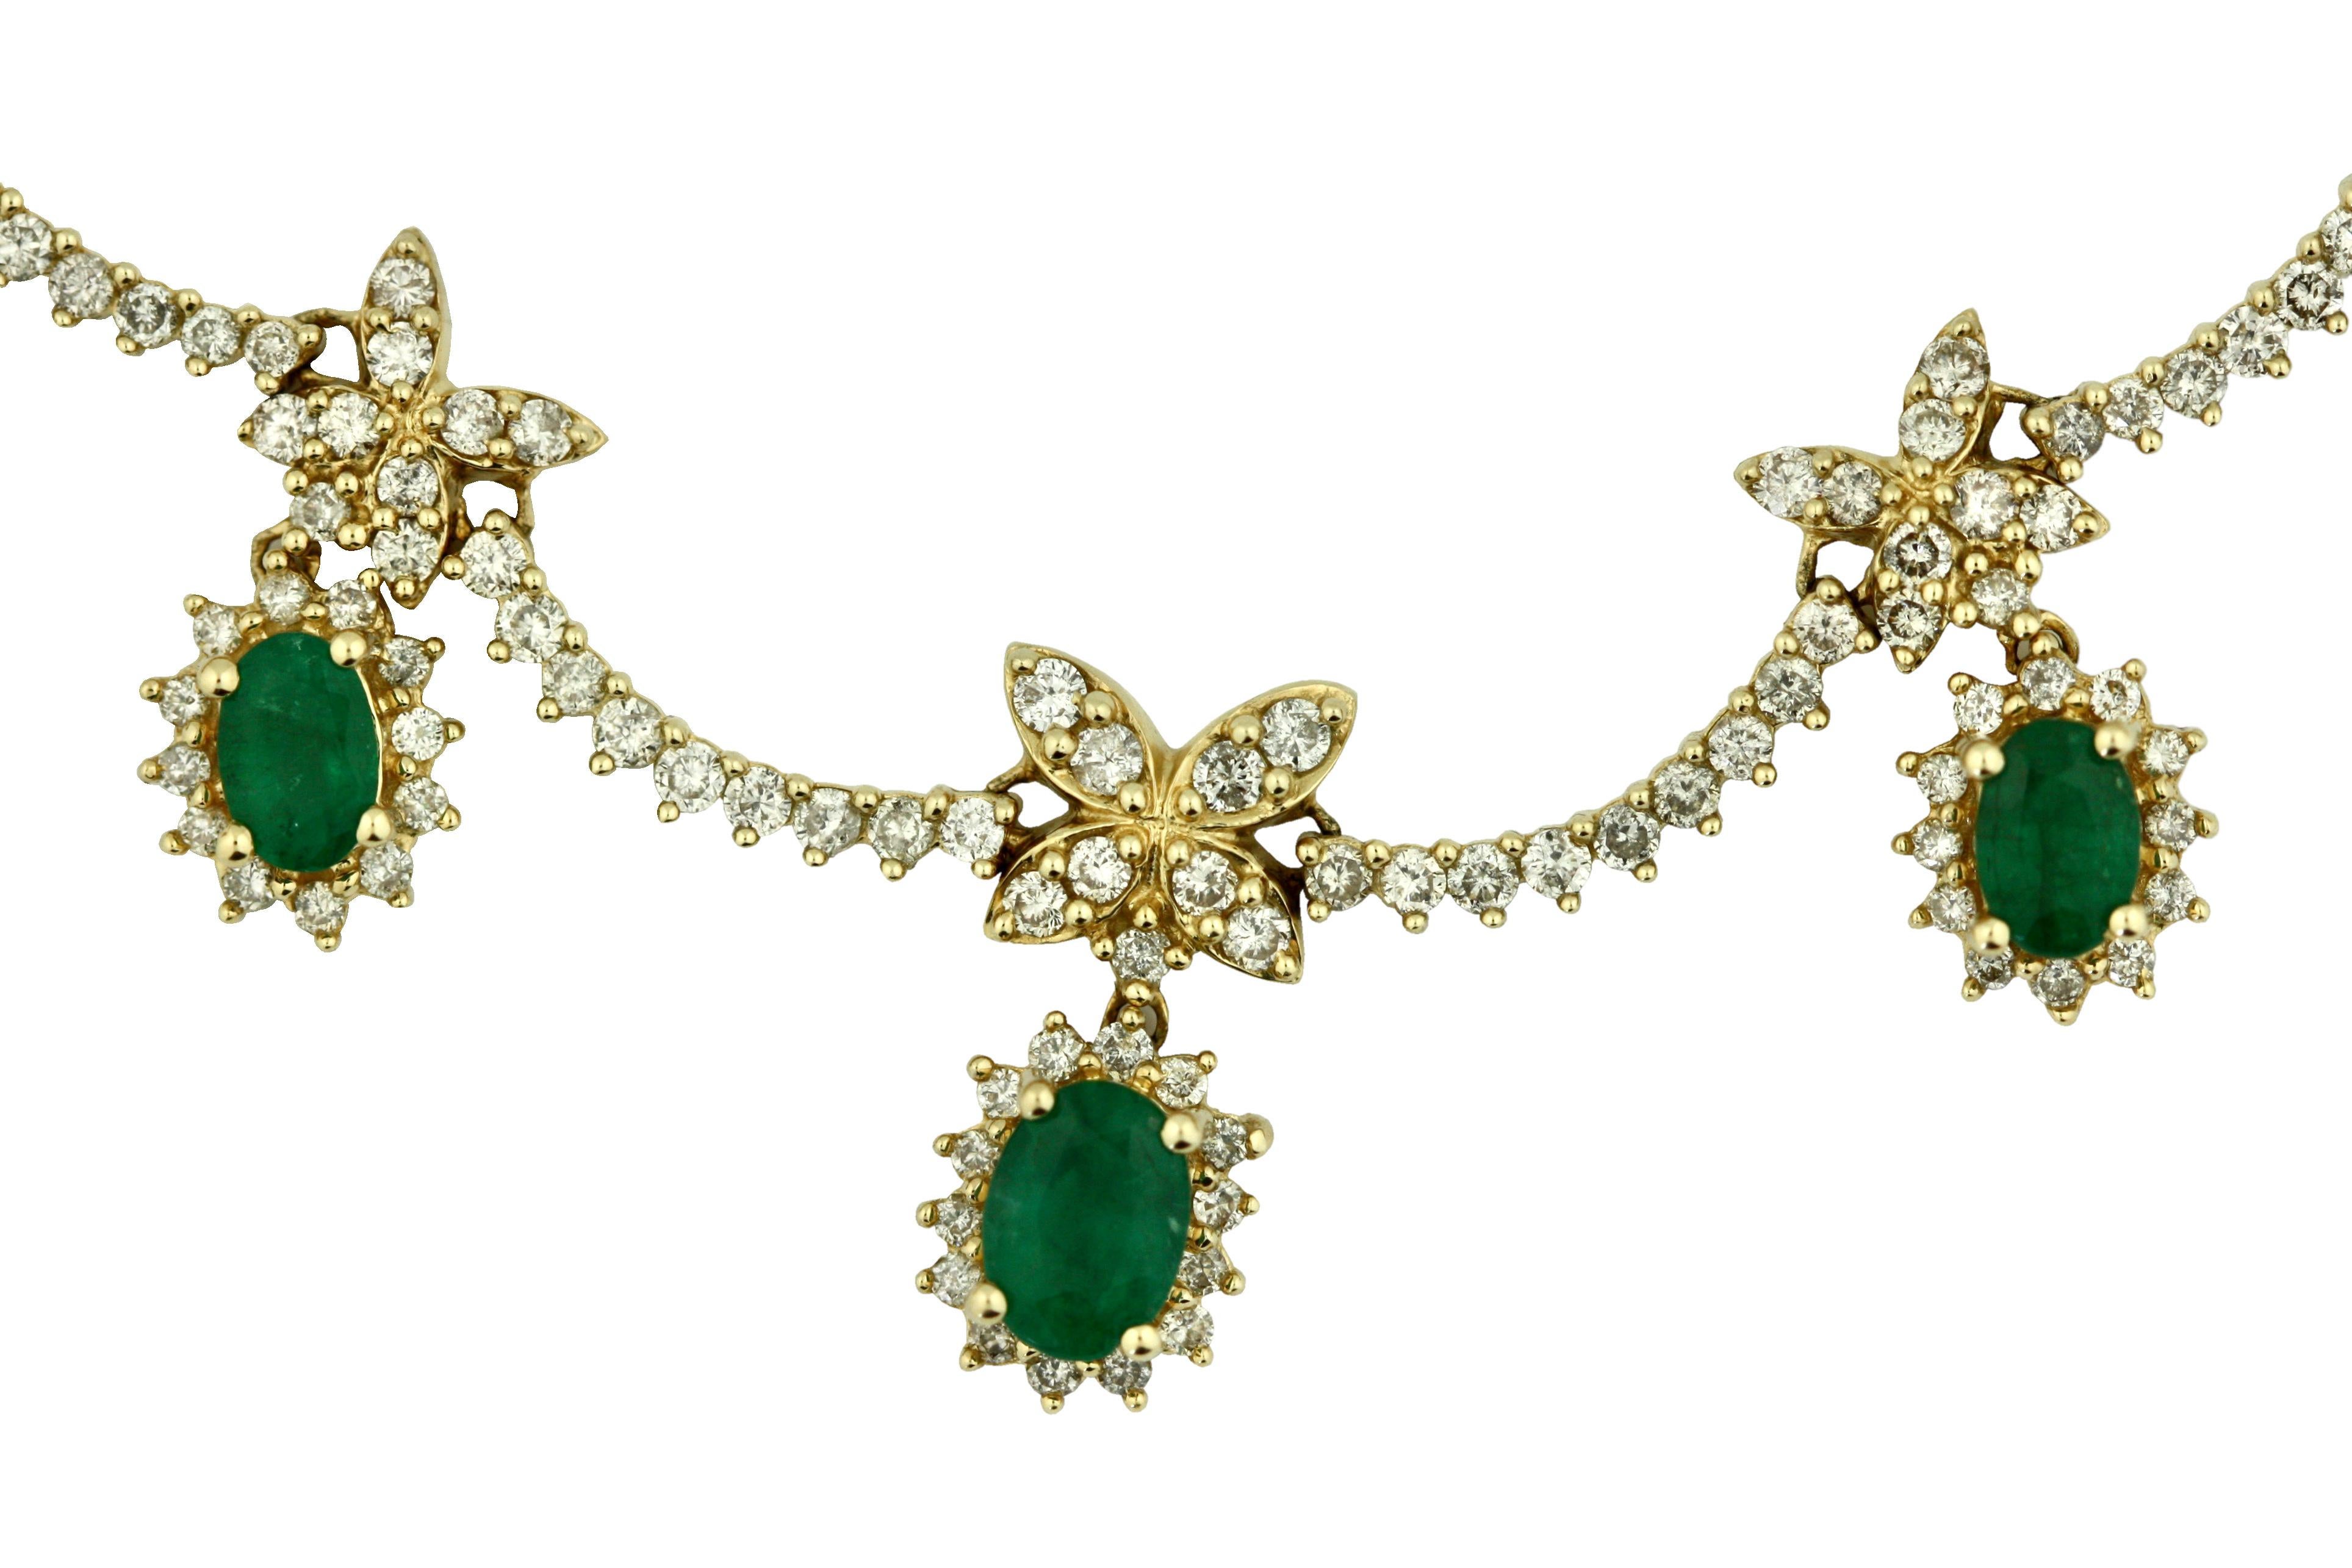 Women's or Men's Emerald and Diamond Necklace Mounted in 14 Karat Gold